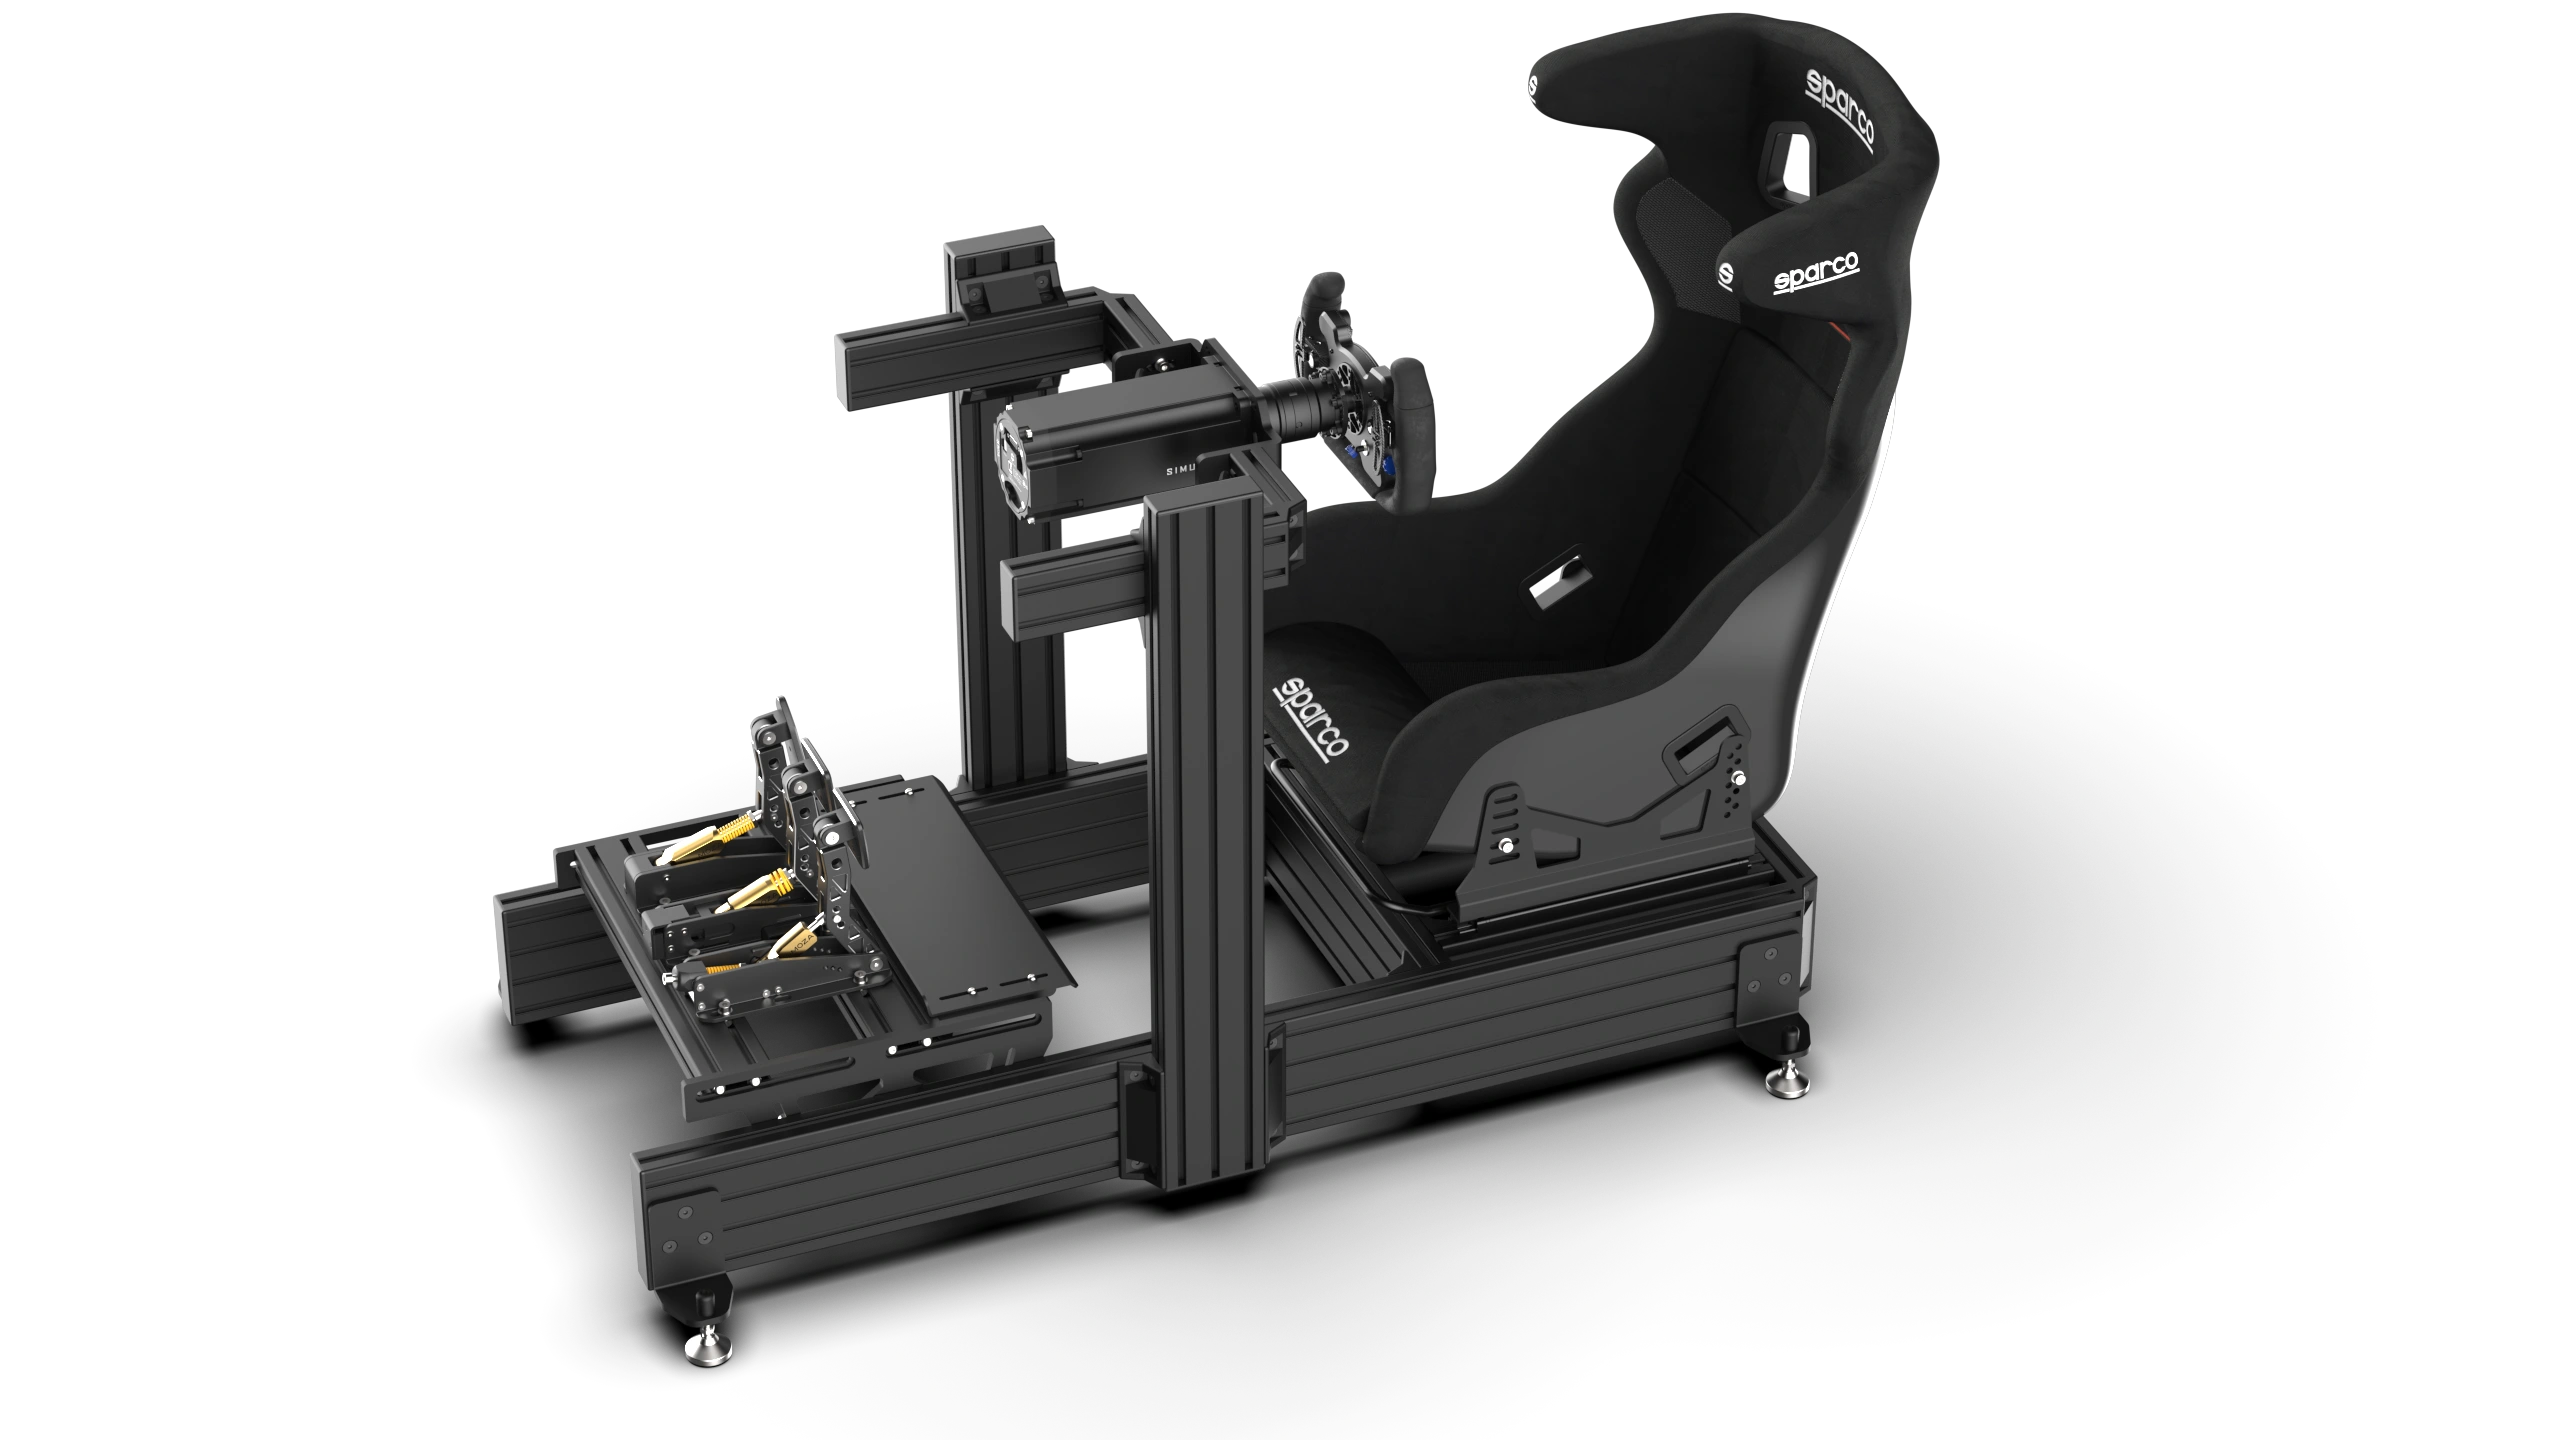 rseat-a1-gt-006-v2